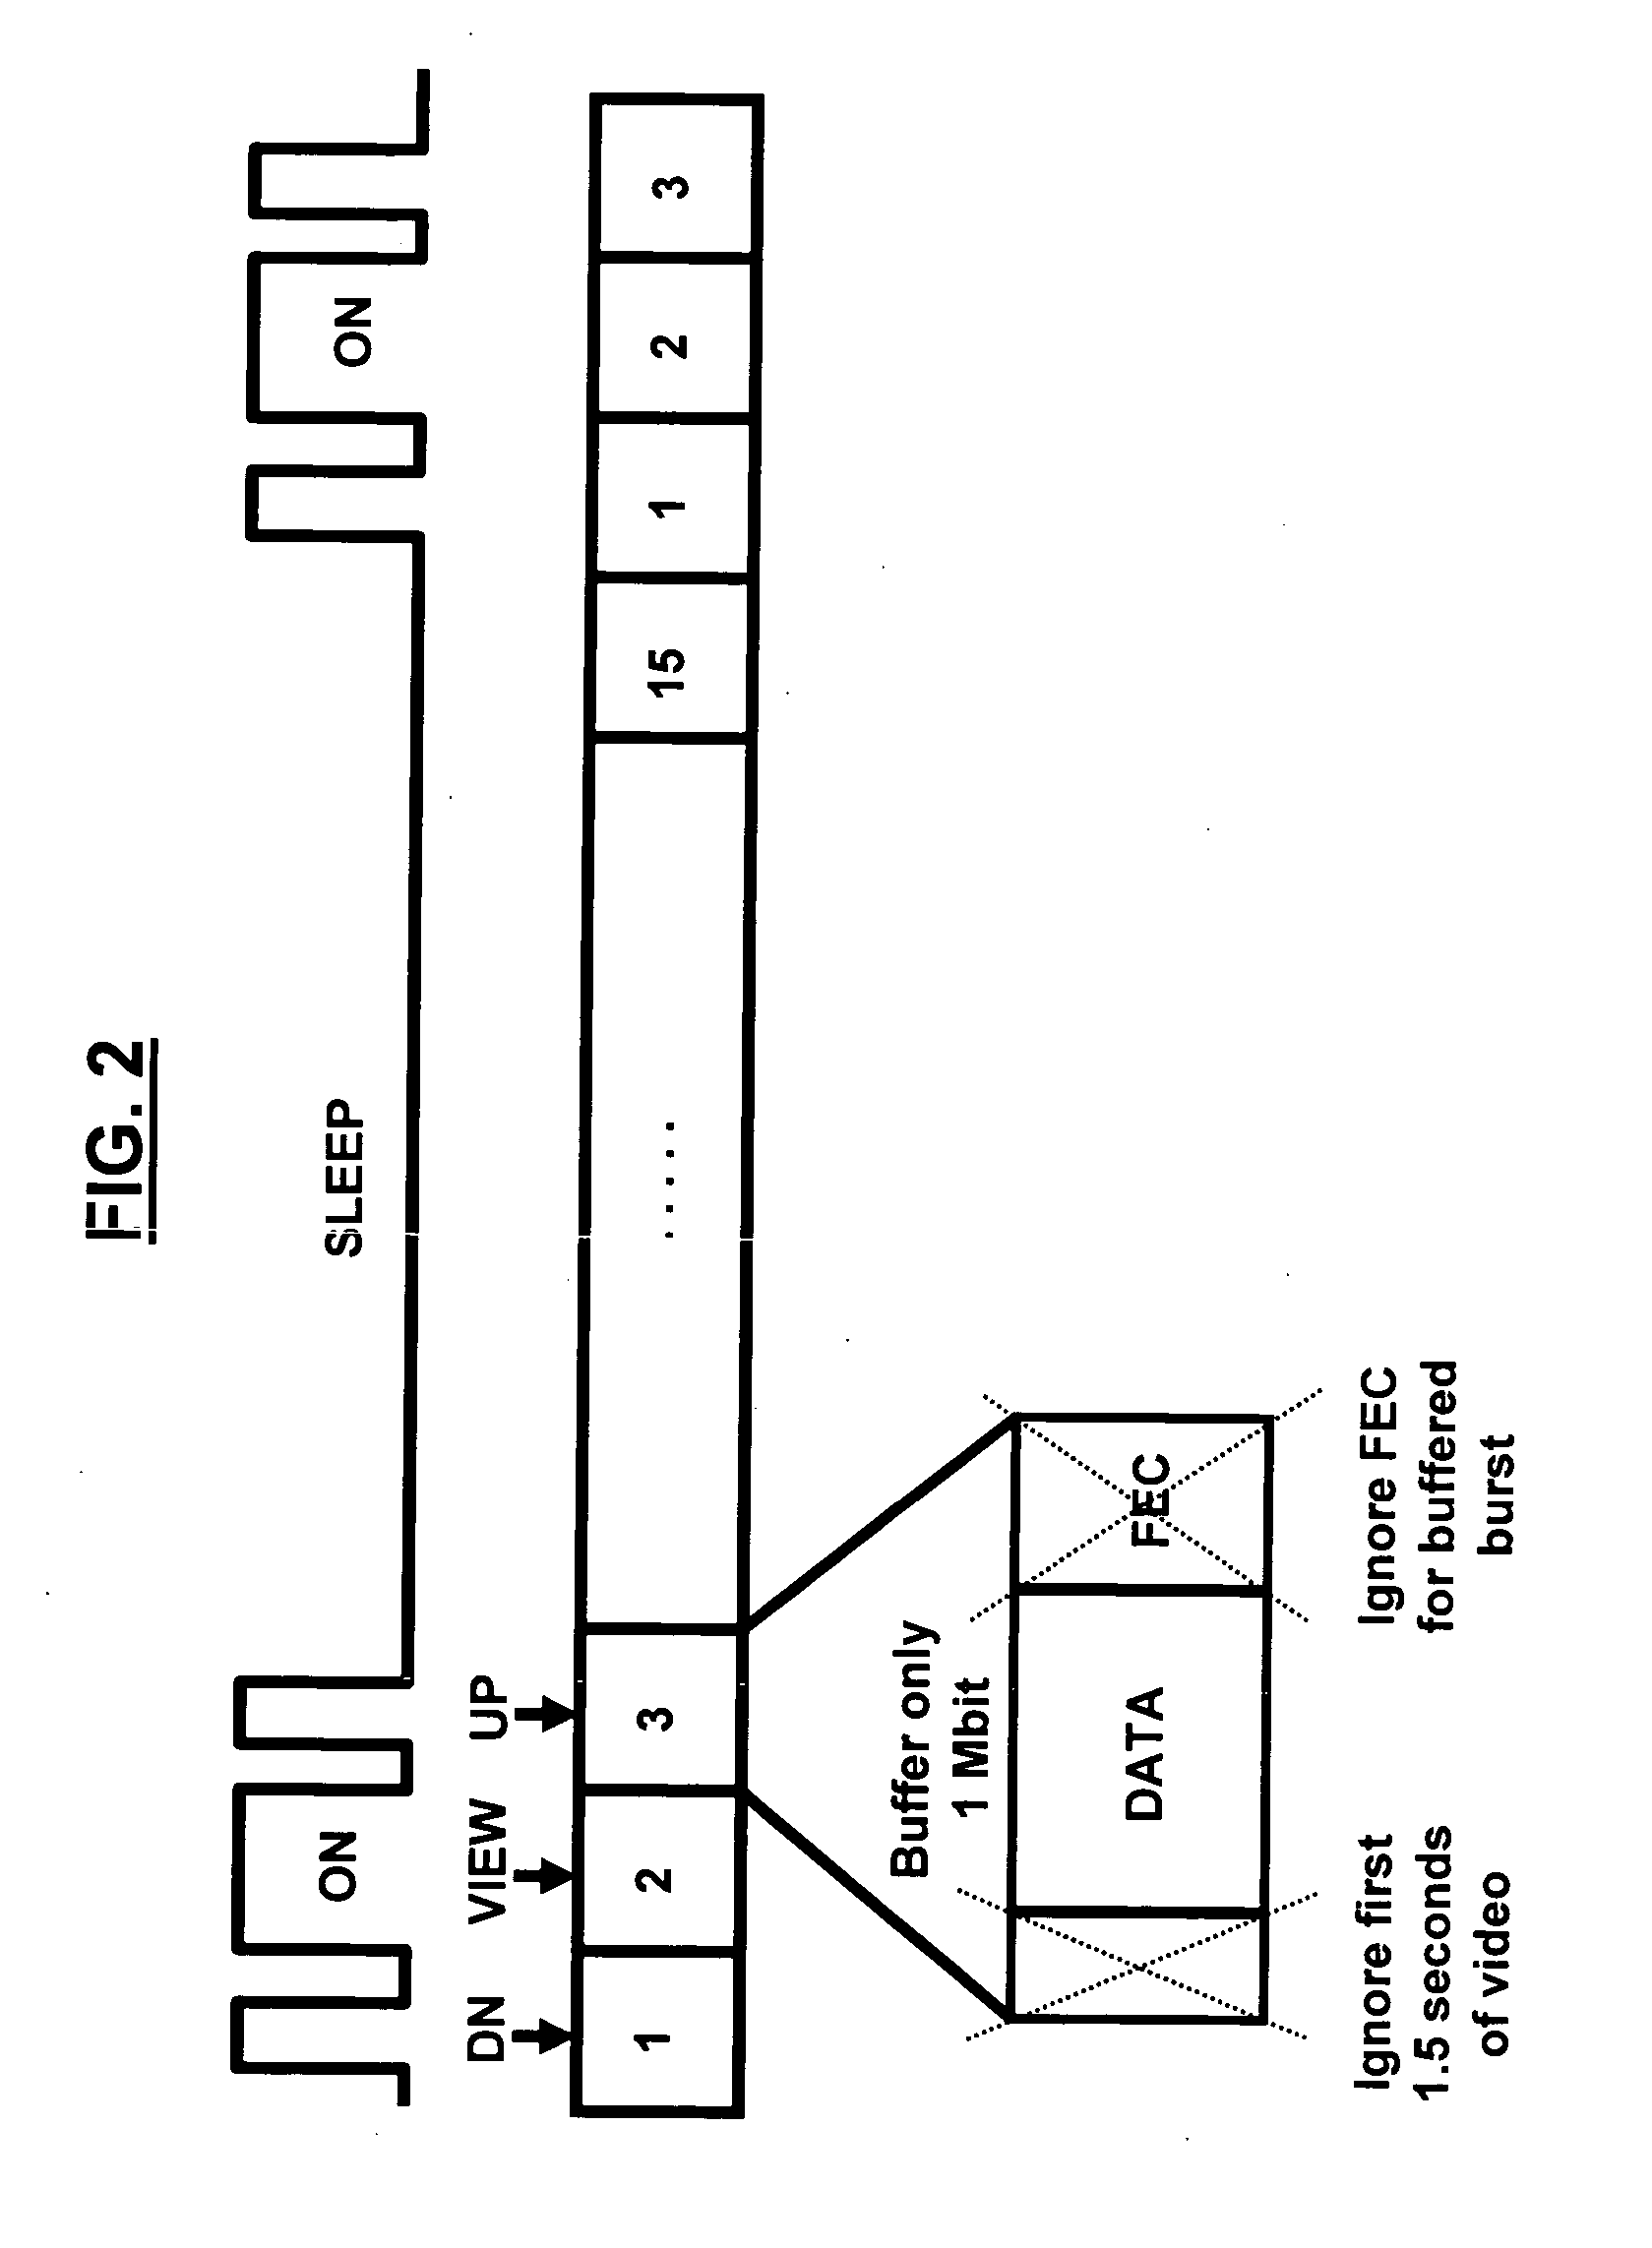 Fast switching between time division multiplexed (TDM) channels